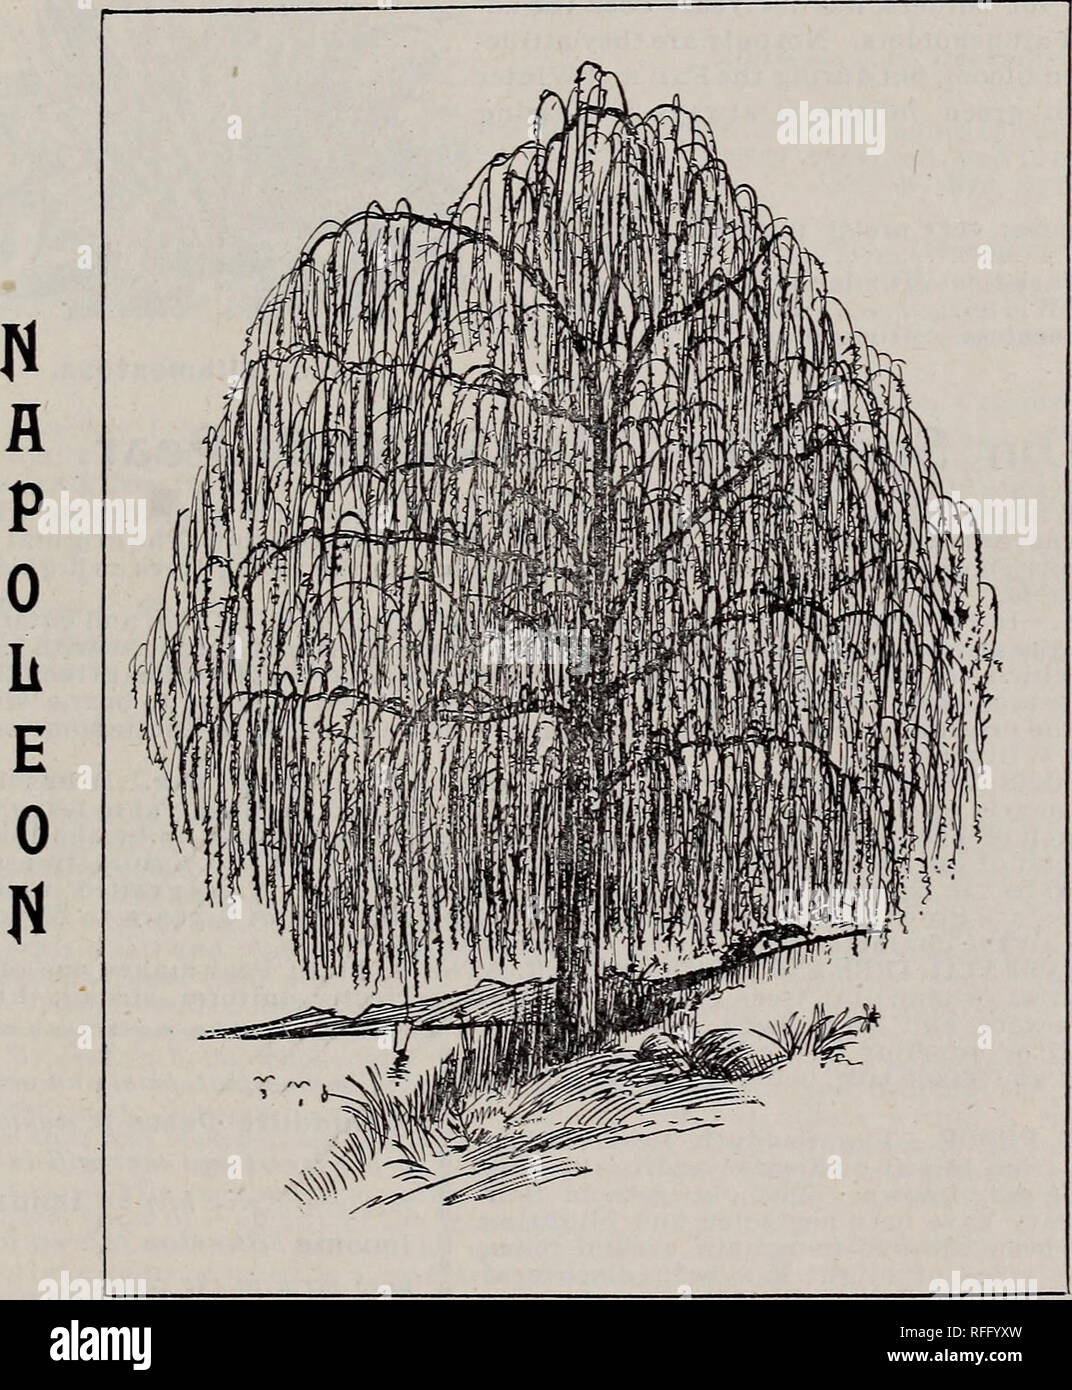 . Wholesale price list of Augustine &amp; Co., nurserymen. Nursery stock Illinois Normal Catalogs; Fruit trees Seedlings Catalogs; Fruit Seeds Catalogs; Plants, Ornamental Catalogs. NORMAL, ILLINOIS. 19 Weeping Trees. NAPOLEON WEEPING WILLOW. The most beautiful ornamental tree of its kind grown. The original stock came directly from the famous Weeping Willow trees growing around the grave of Napoleon on the Island of St. Helena. The original stock came to us through Mr. A. T. Sherman formerly of this place. Some years ago a missionary returning from Africa, who was a great admirer of Napoieon  Stock Photo